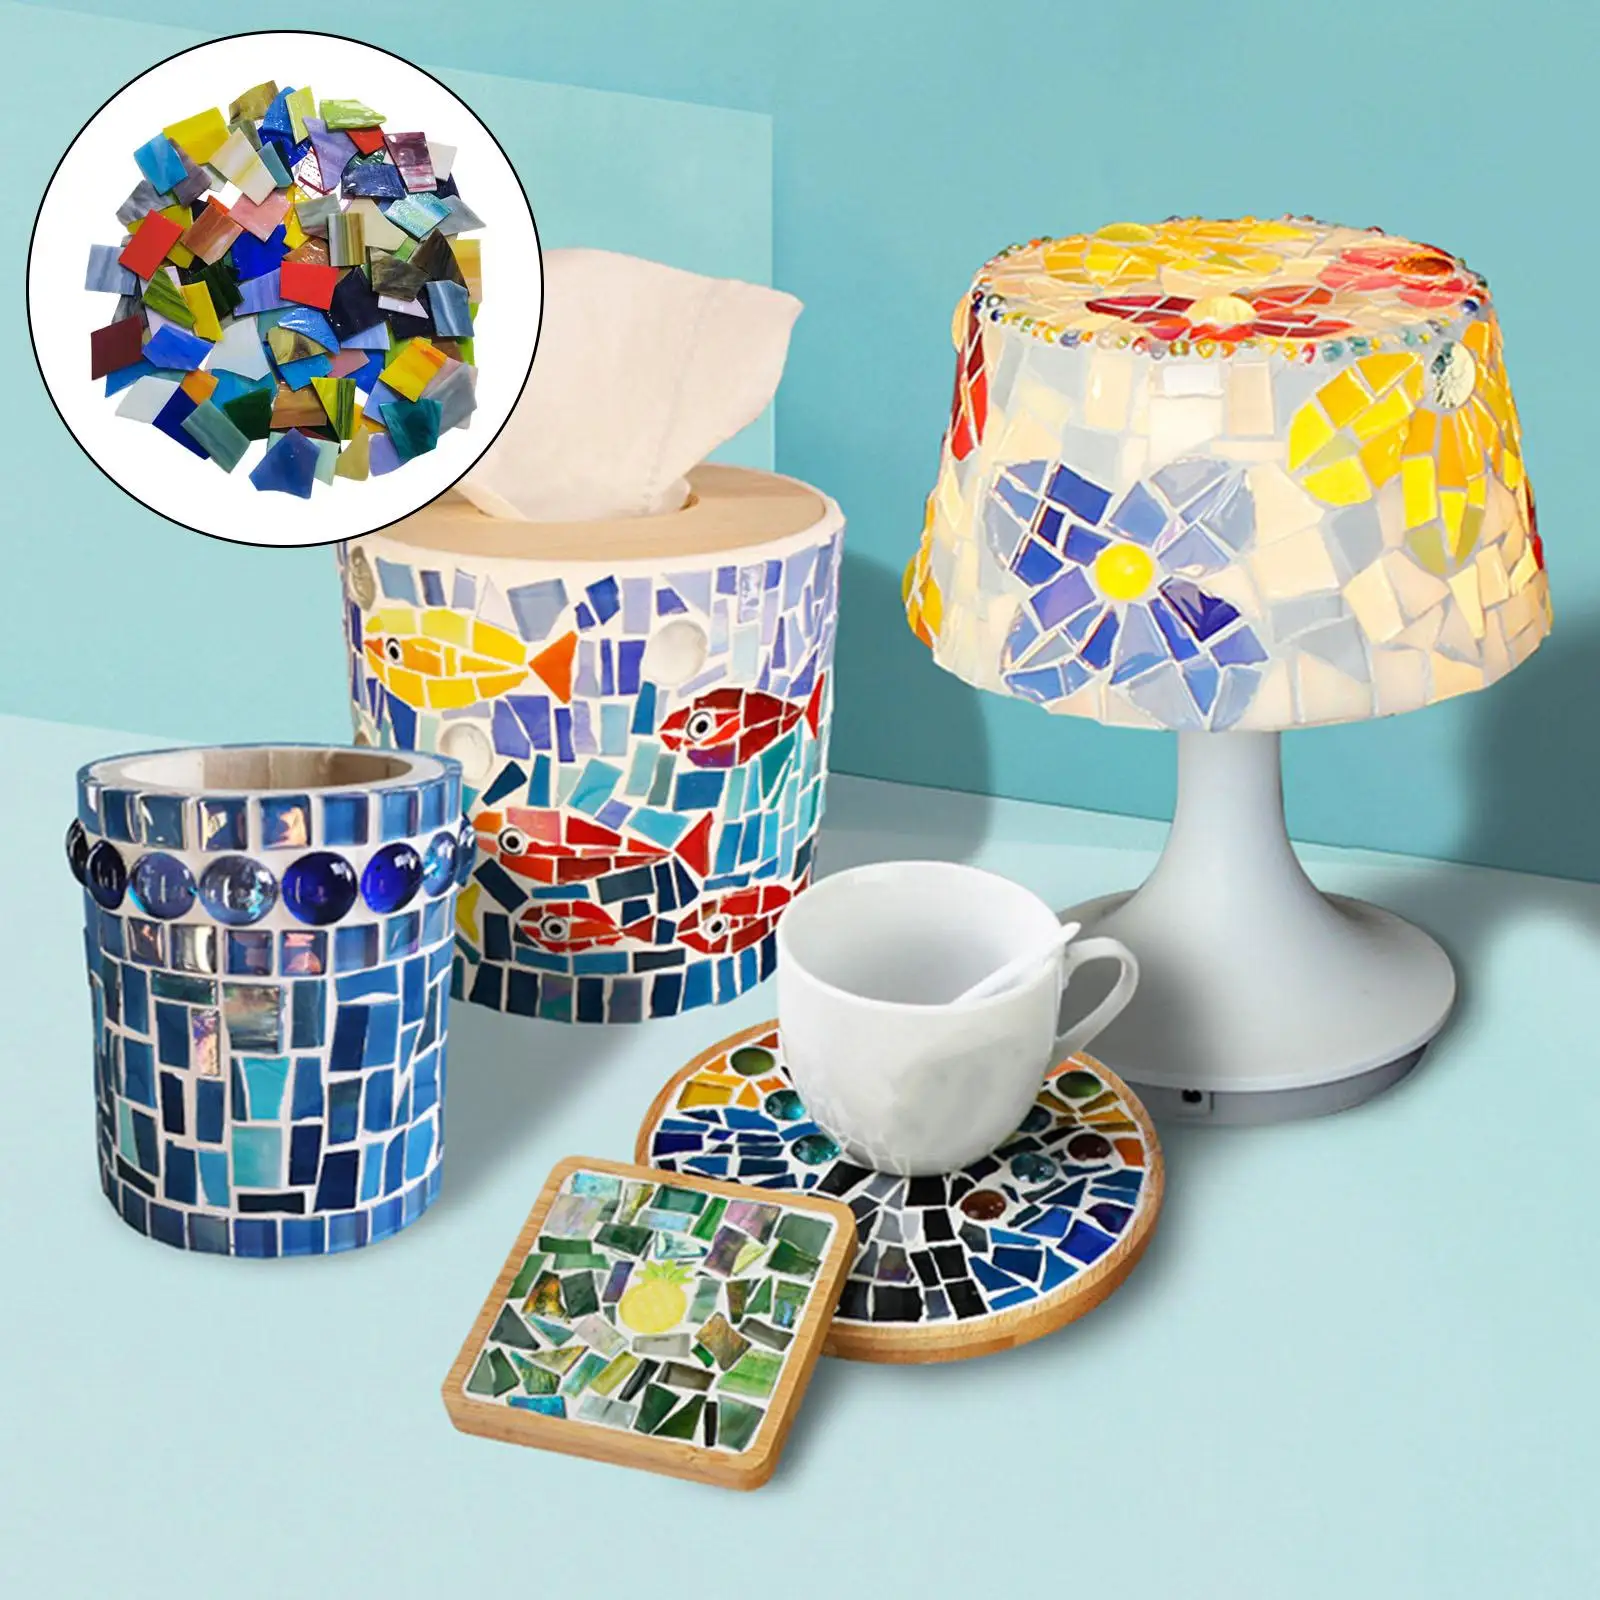 Colorful Mixed Shapes Mosaic Tiles for Crafts Garden Seat Table Cups Artwork Home Ornaments Mosaic Projects